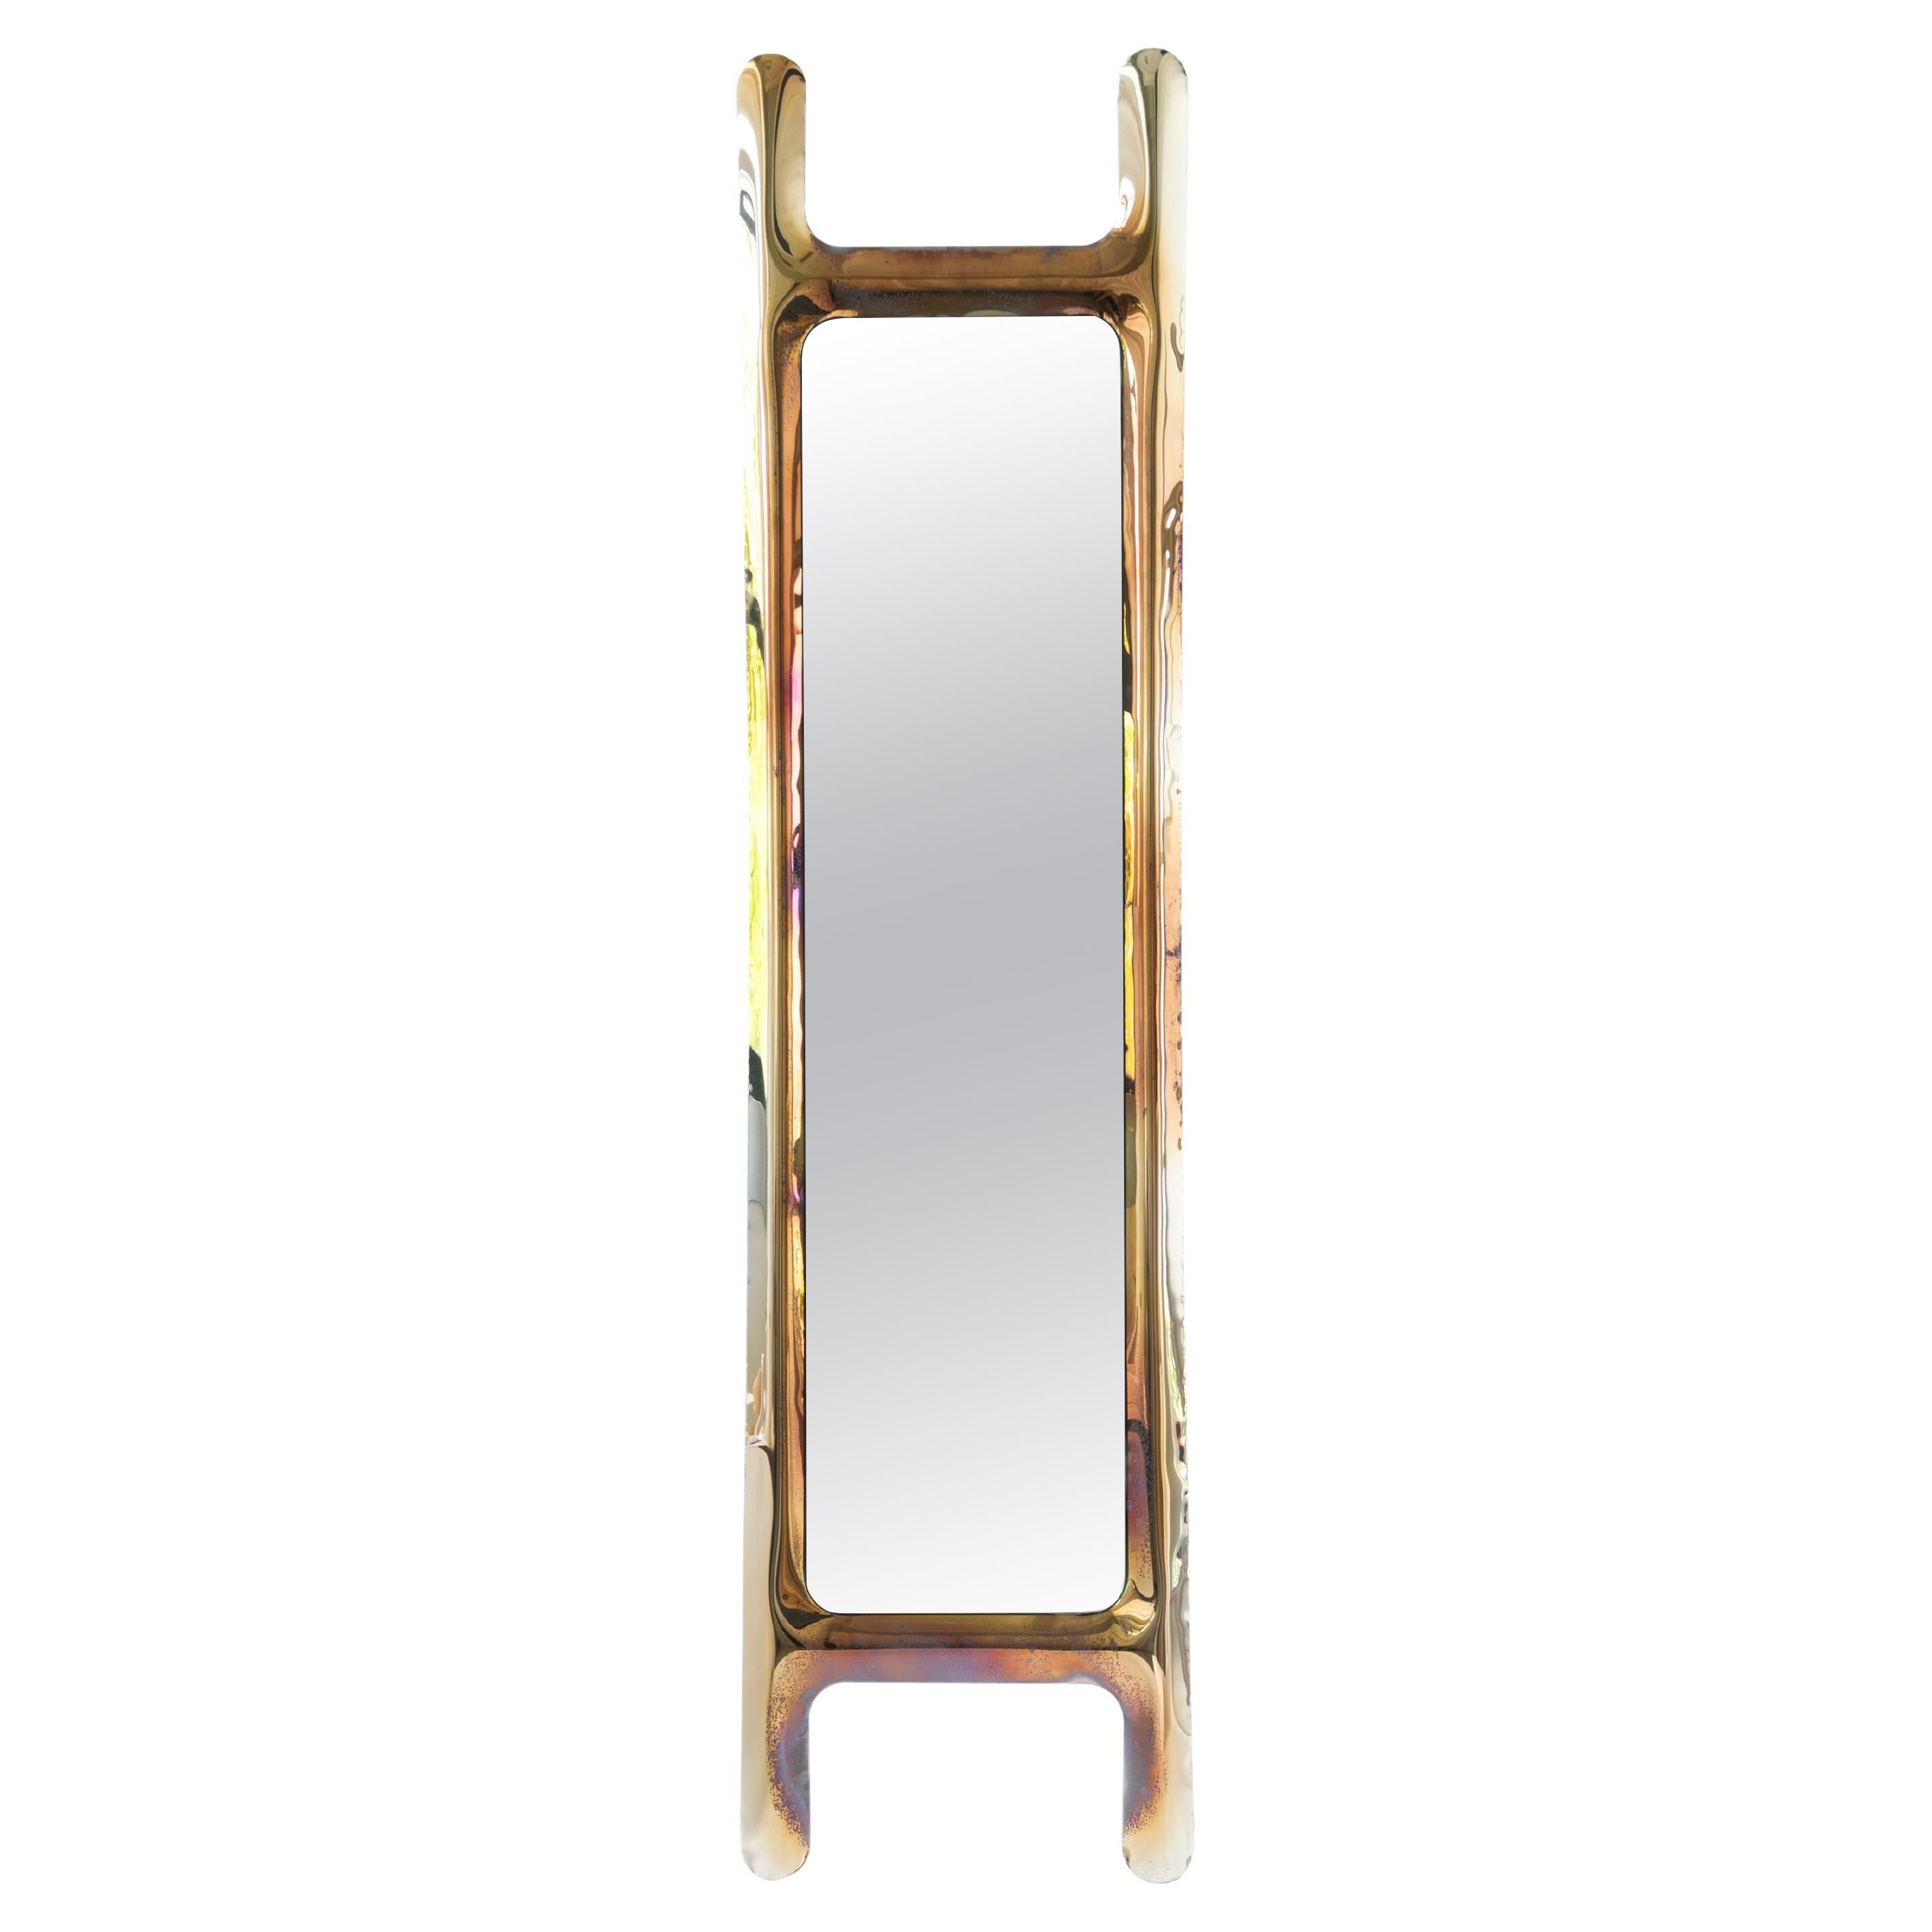 Contemporary Mirror 'Drab' by Zieta, Flamed Gold